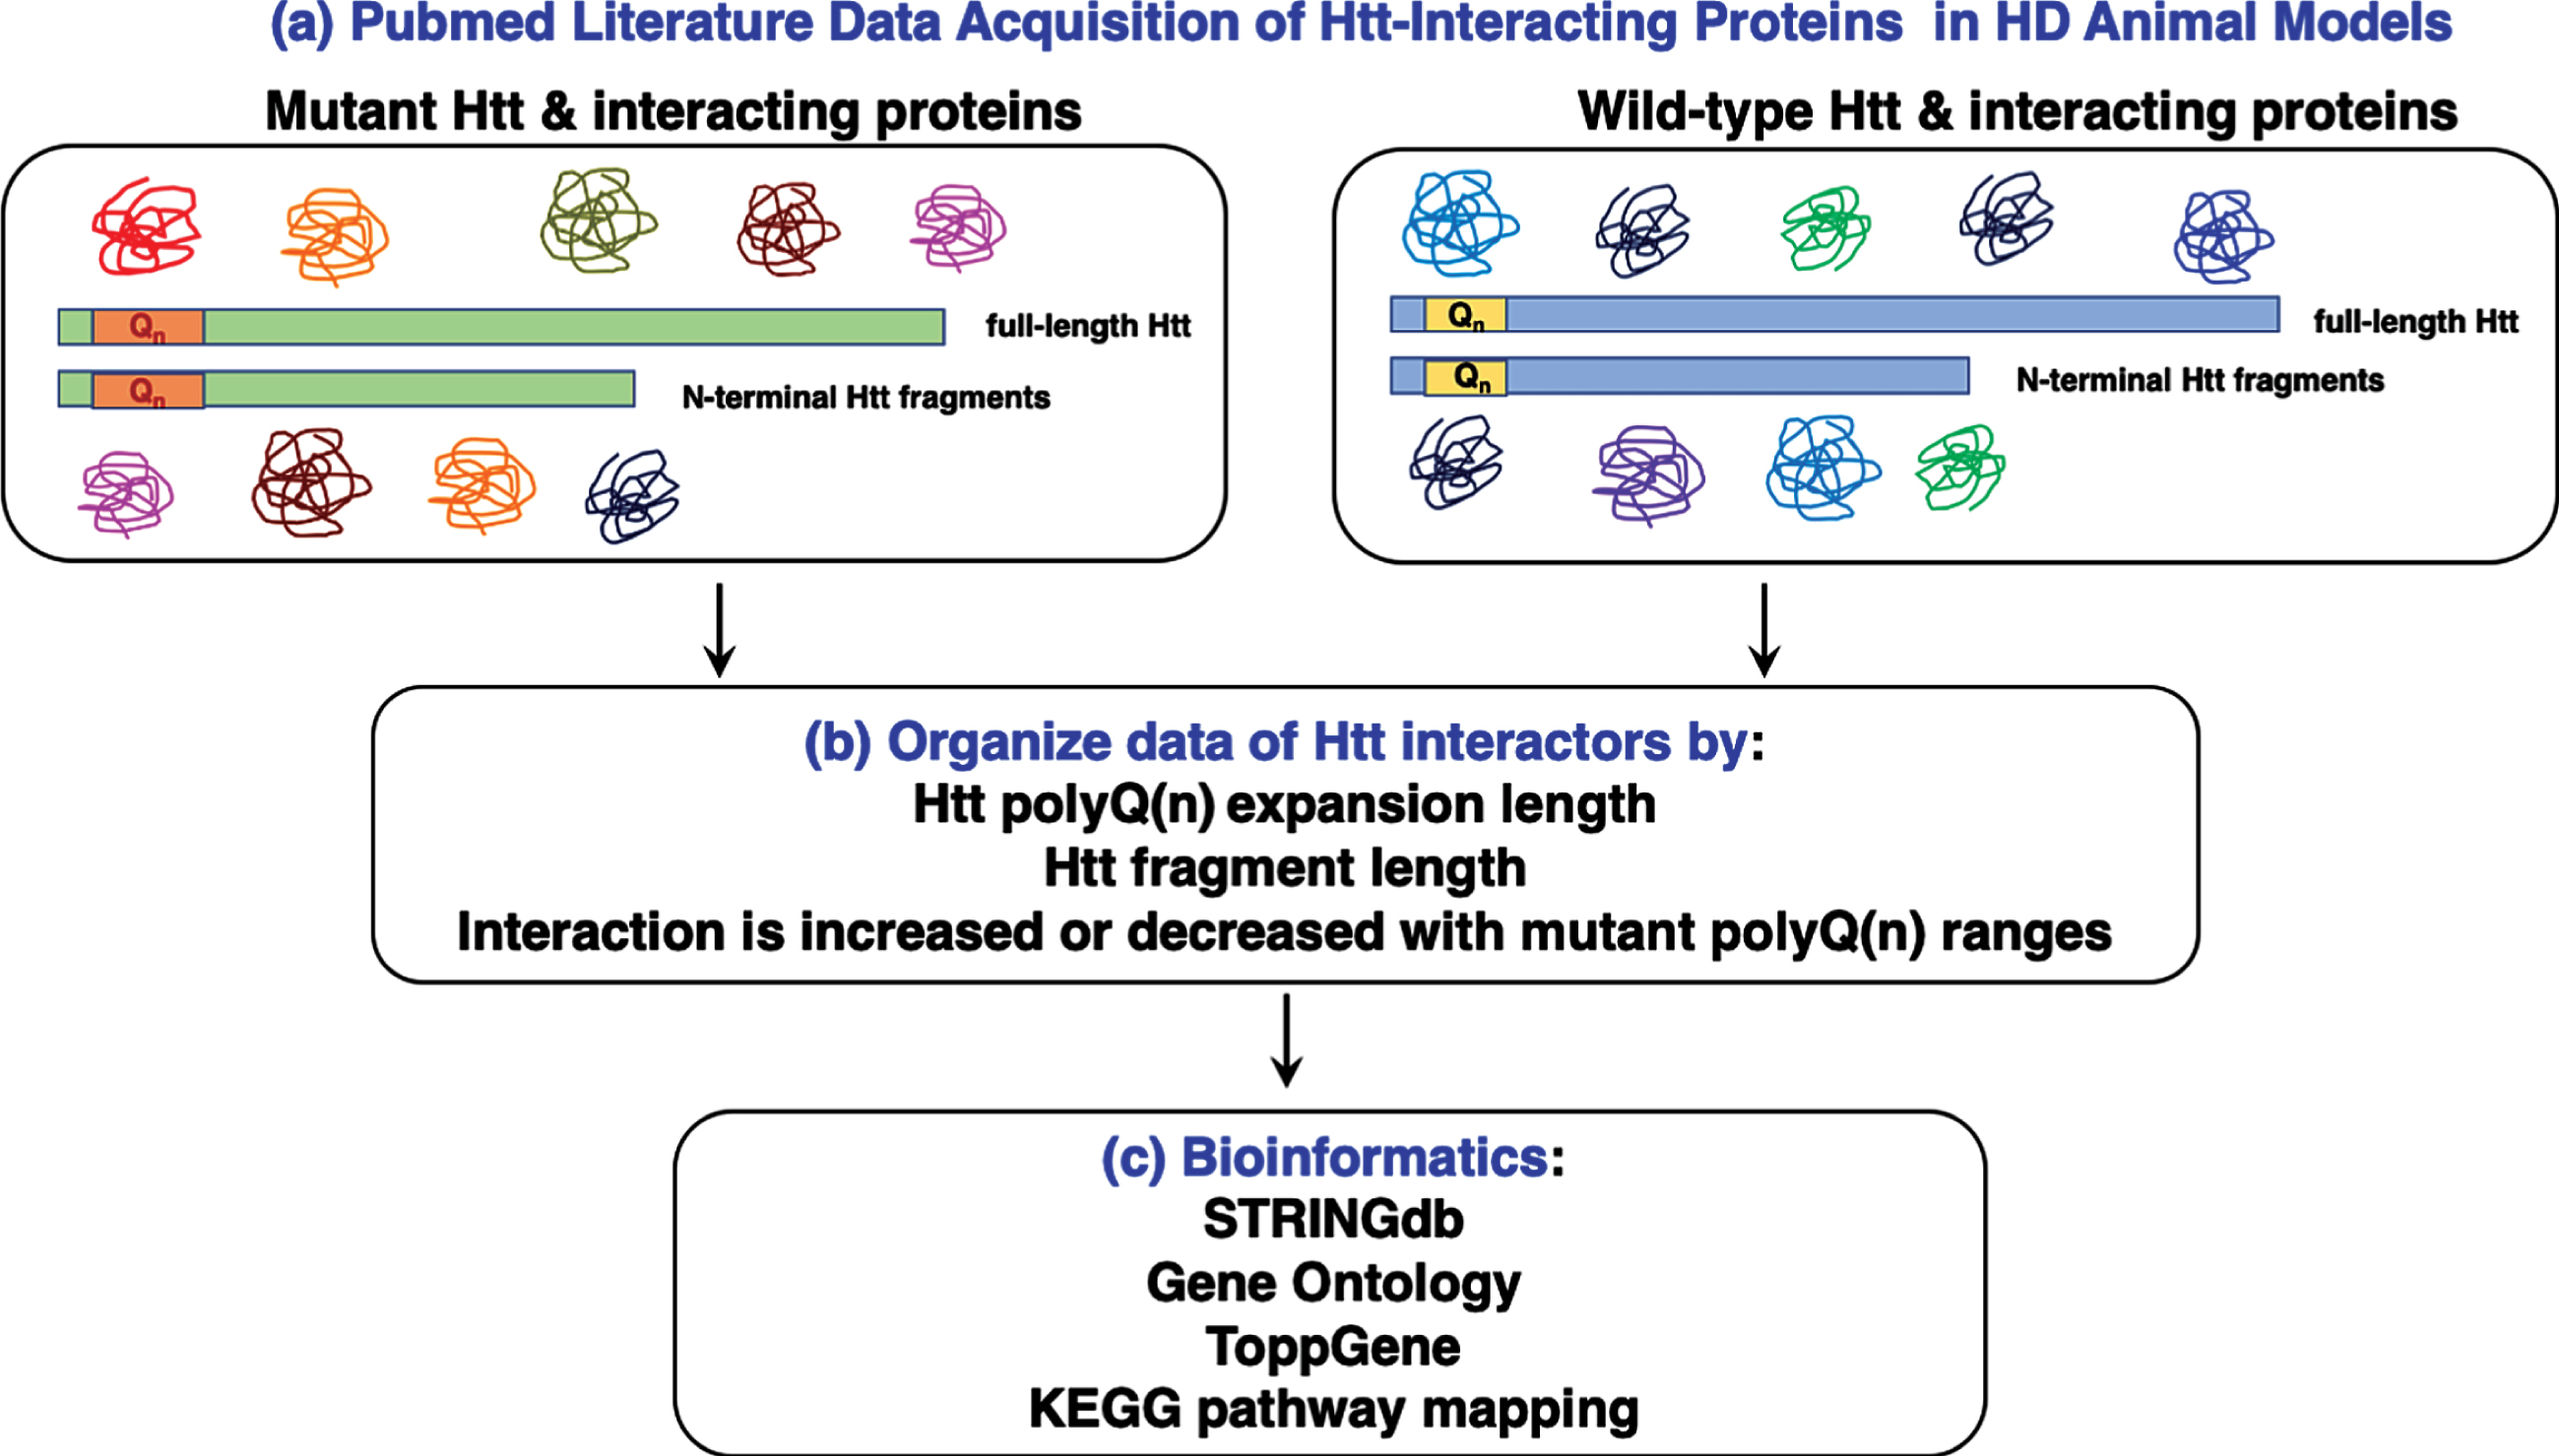 Work-flow for bioinformatics analysis of huntingtin (Htt) interacting proteins reported in the literature. Literature searches for proteins interacting with mutant Htt and wt Htt were conducted with the PubMed resource (a). Information about Htt interactors was organized by experimental parameters of the reported studies, including the polyQ(n) expansion length, Htt fragment length, and whether the interaction is increased or decreased with mutant polyQ(n) Htt fragments (b). Compiled Htt interacting proteins (Supplementary Table 1) were subjected to bioinformatics analysis assessing statistically significant clusters and KEGG pathways using tools that included STRINGdb, gene ontology, and ToppGene (c).